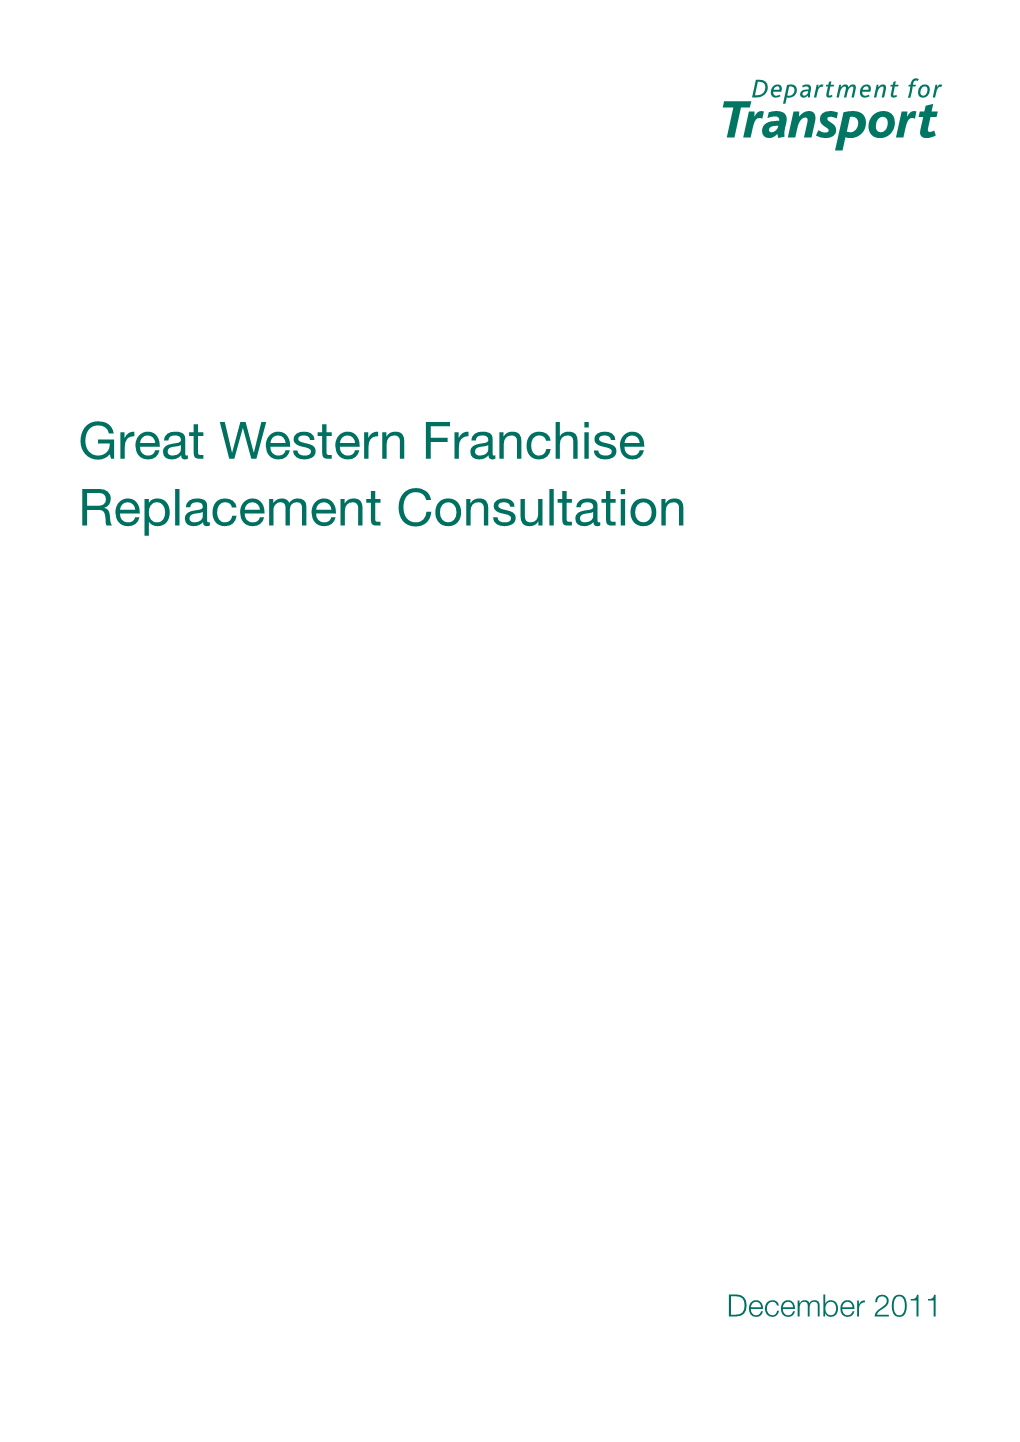 Great Western Franchise Replacement Consultation